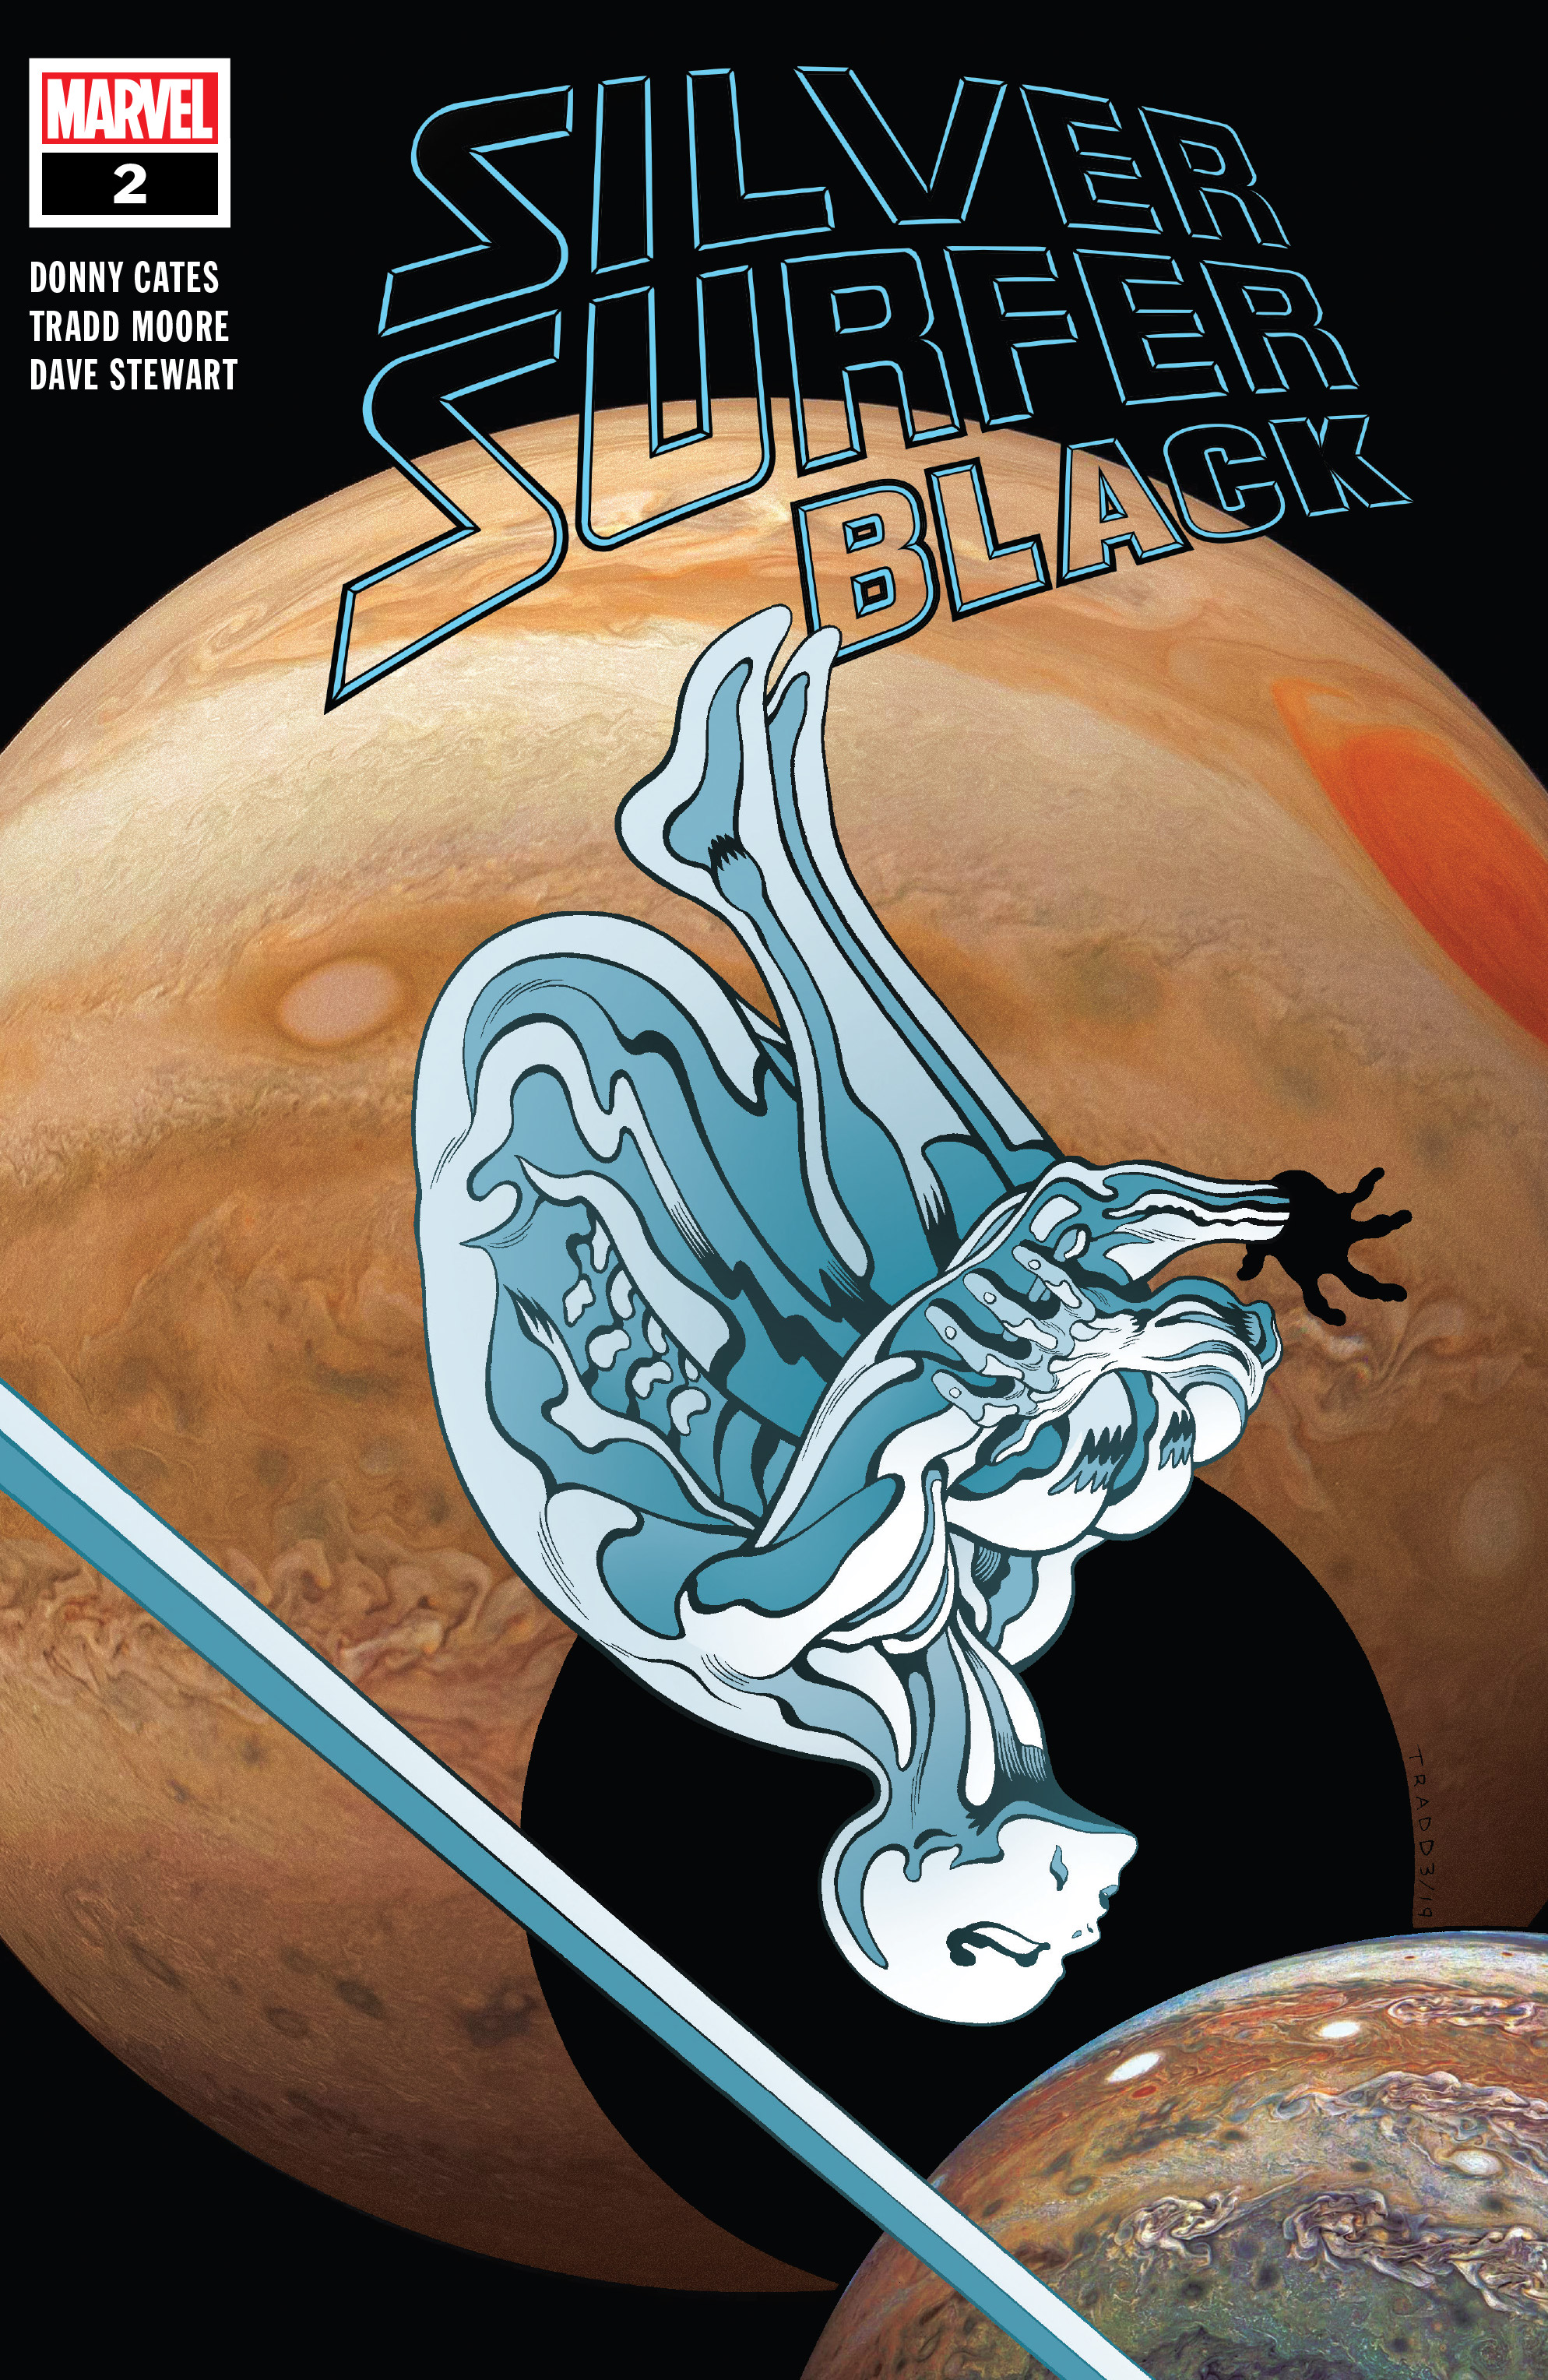 Read online Silver Surfer: Black comic -  Issue #2 - 1